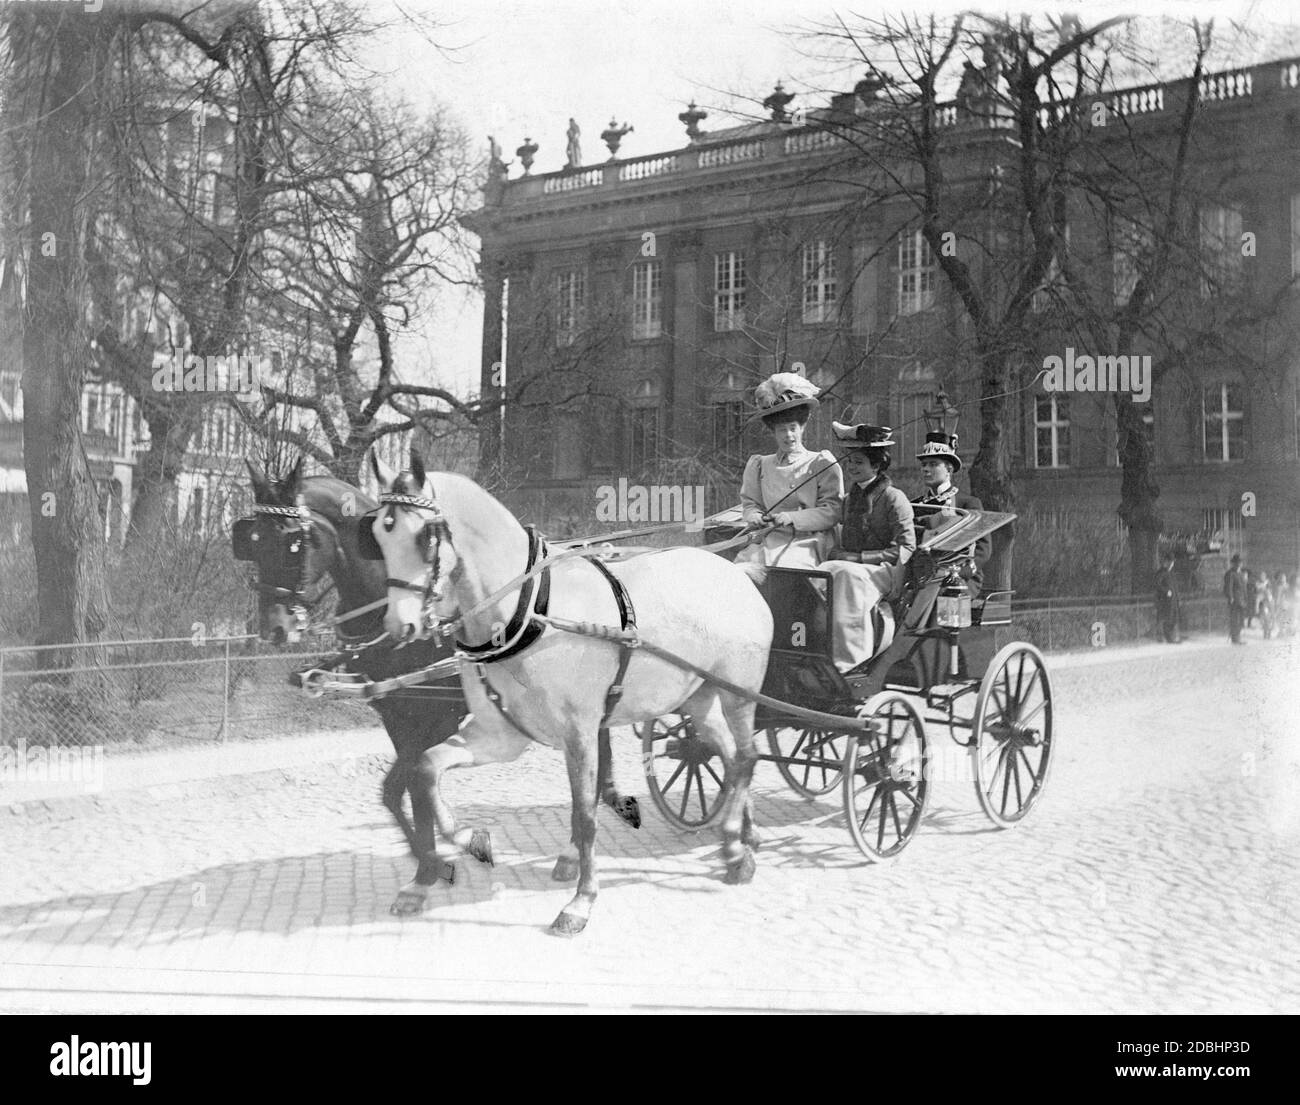 Crown Princess Cecilie of Mecklenburg sits together with a girl in a carriage and rides through Potsdam. A coachman is sitting behind them. In the background on the left, the St. Nicholas Church, on the right a part of the Potsdam City Palace. The photo was taken by the court photographer Ernst Eichgruen in 1907. Stock Photo